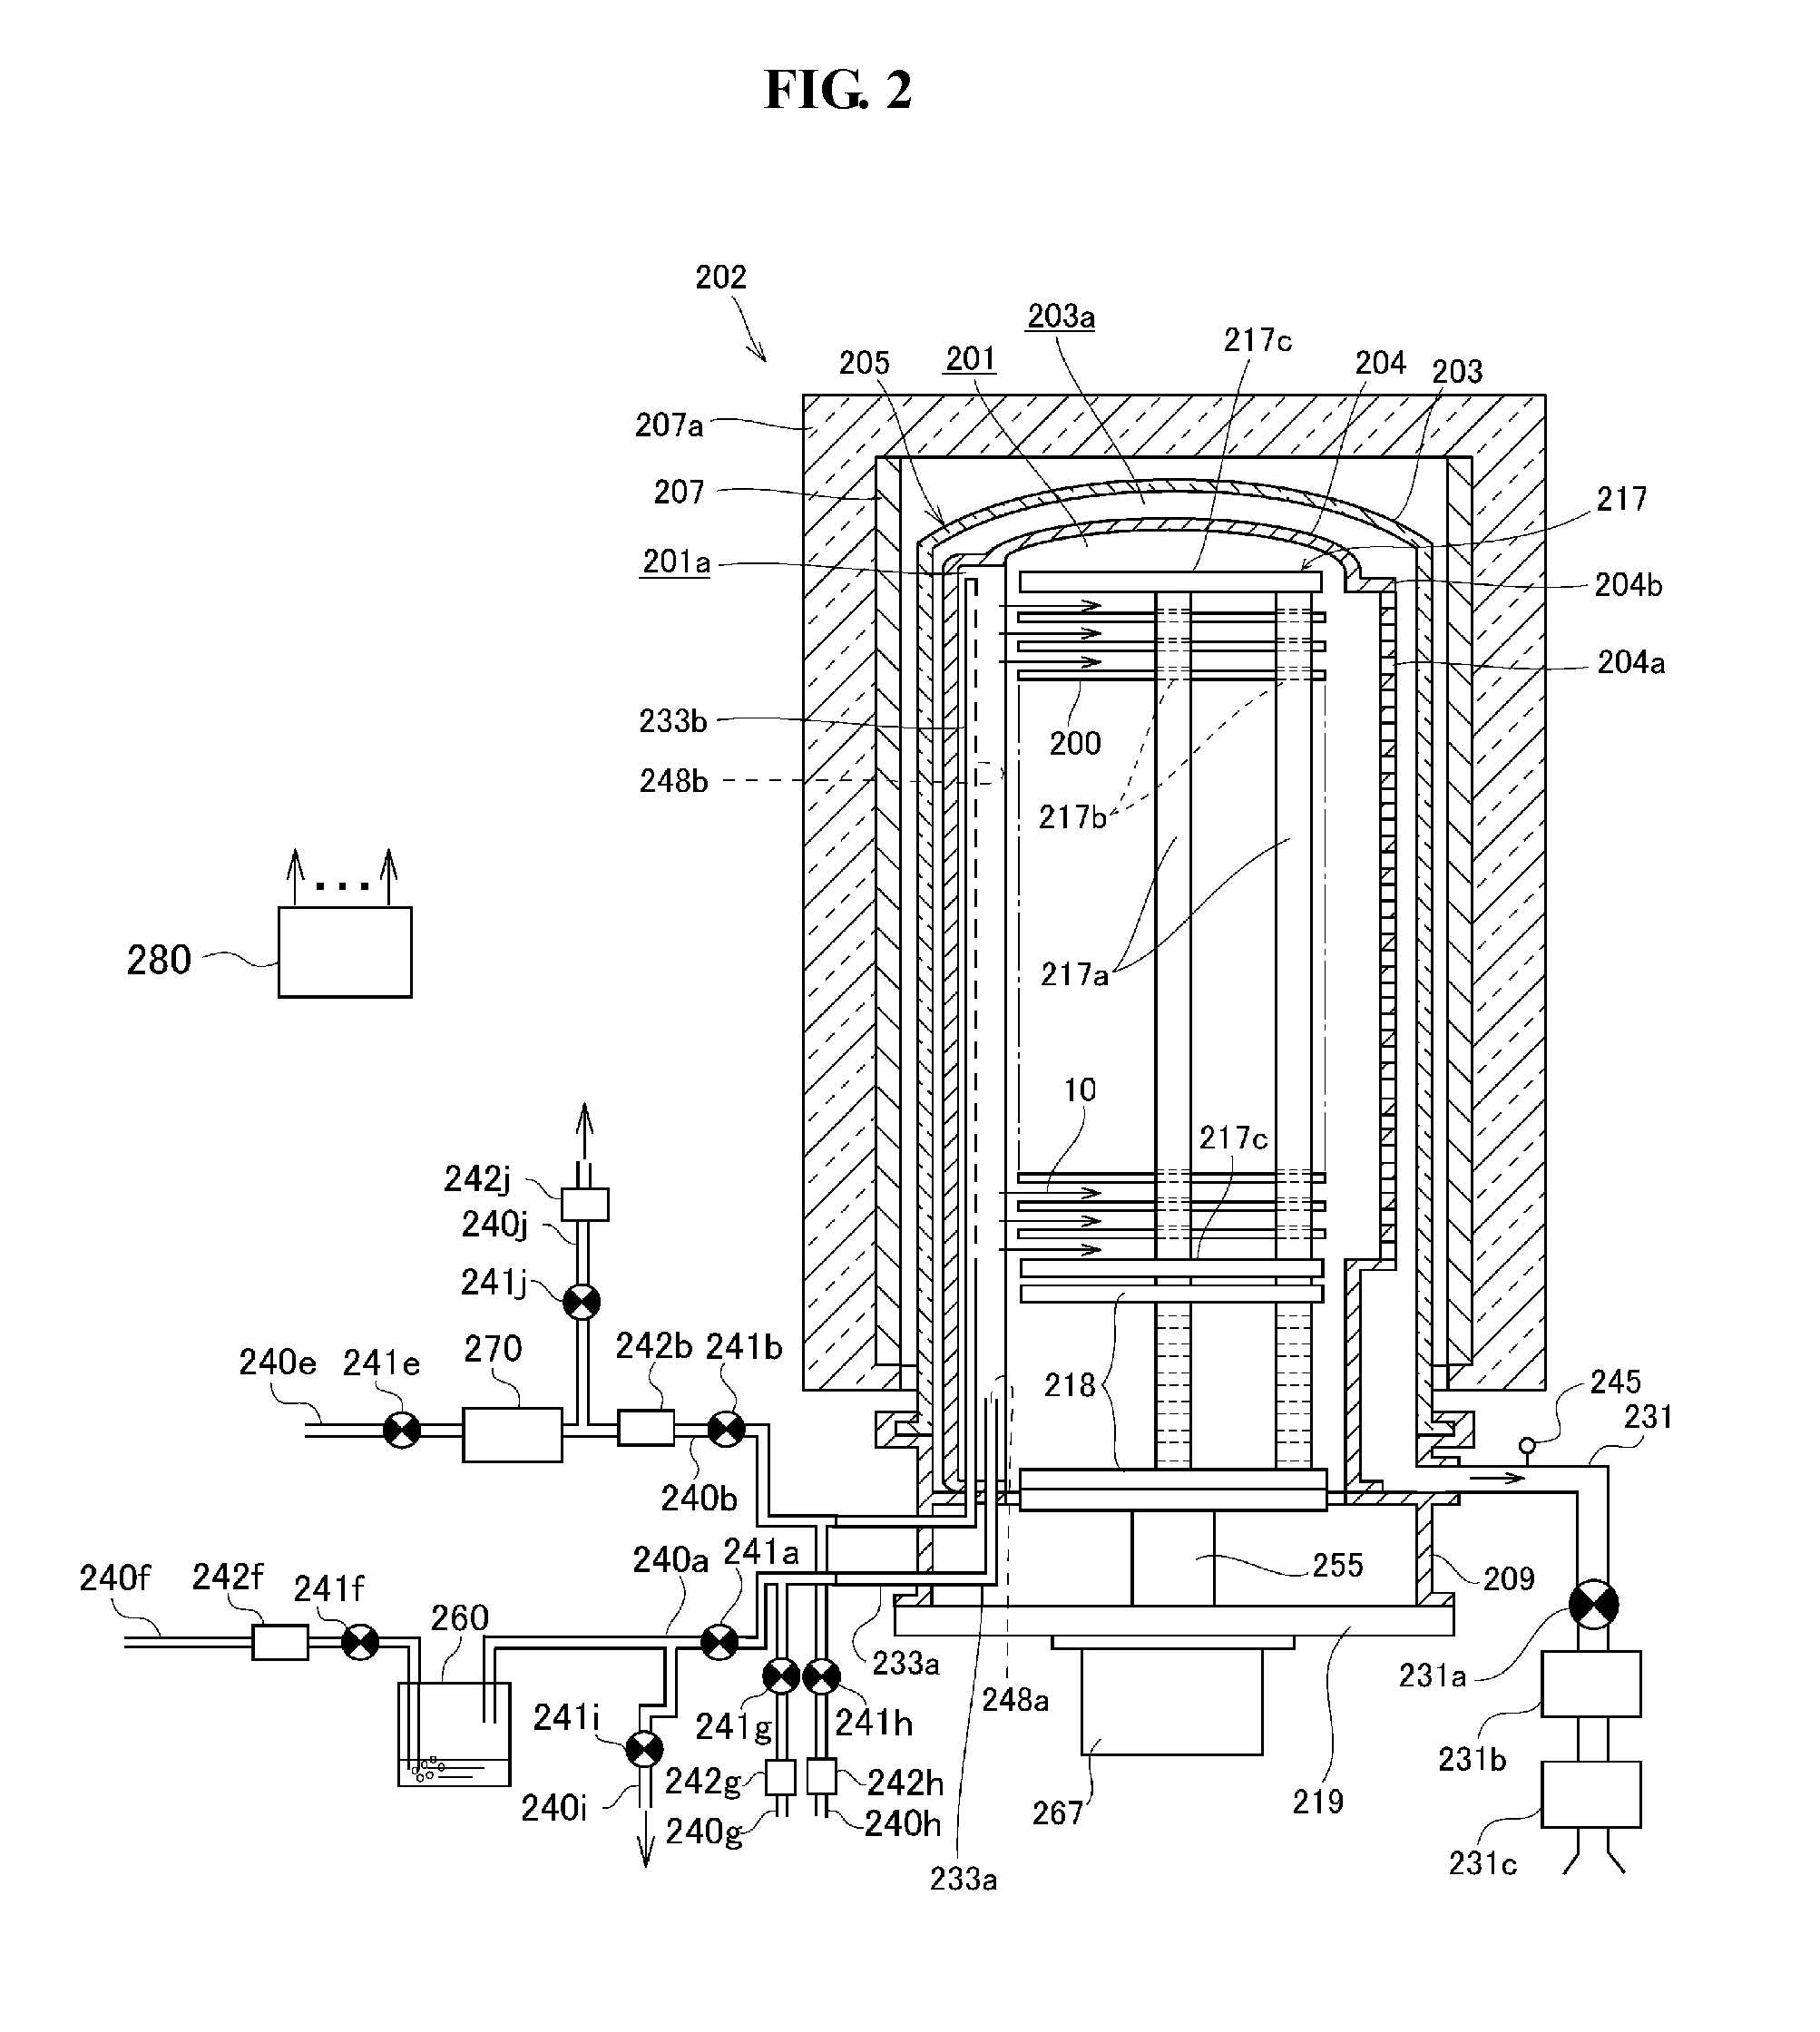 Substrate processing apparatus, method of manufacturing semiconductor device and semiconductor device